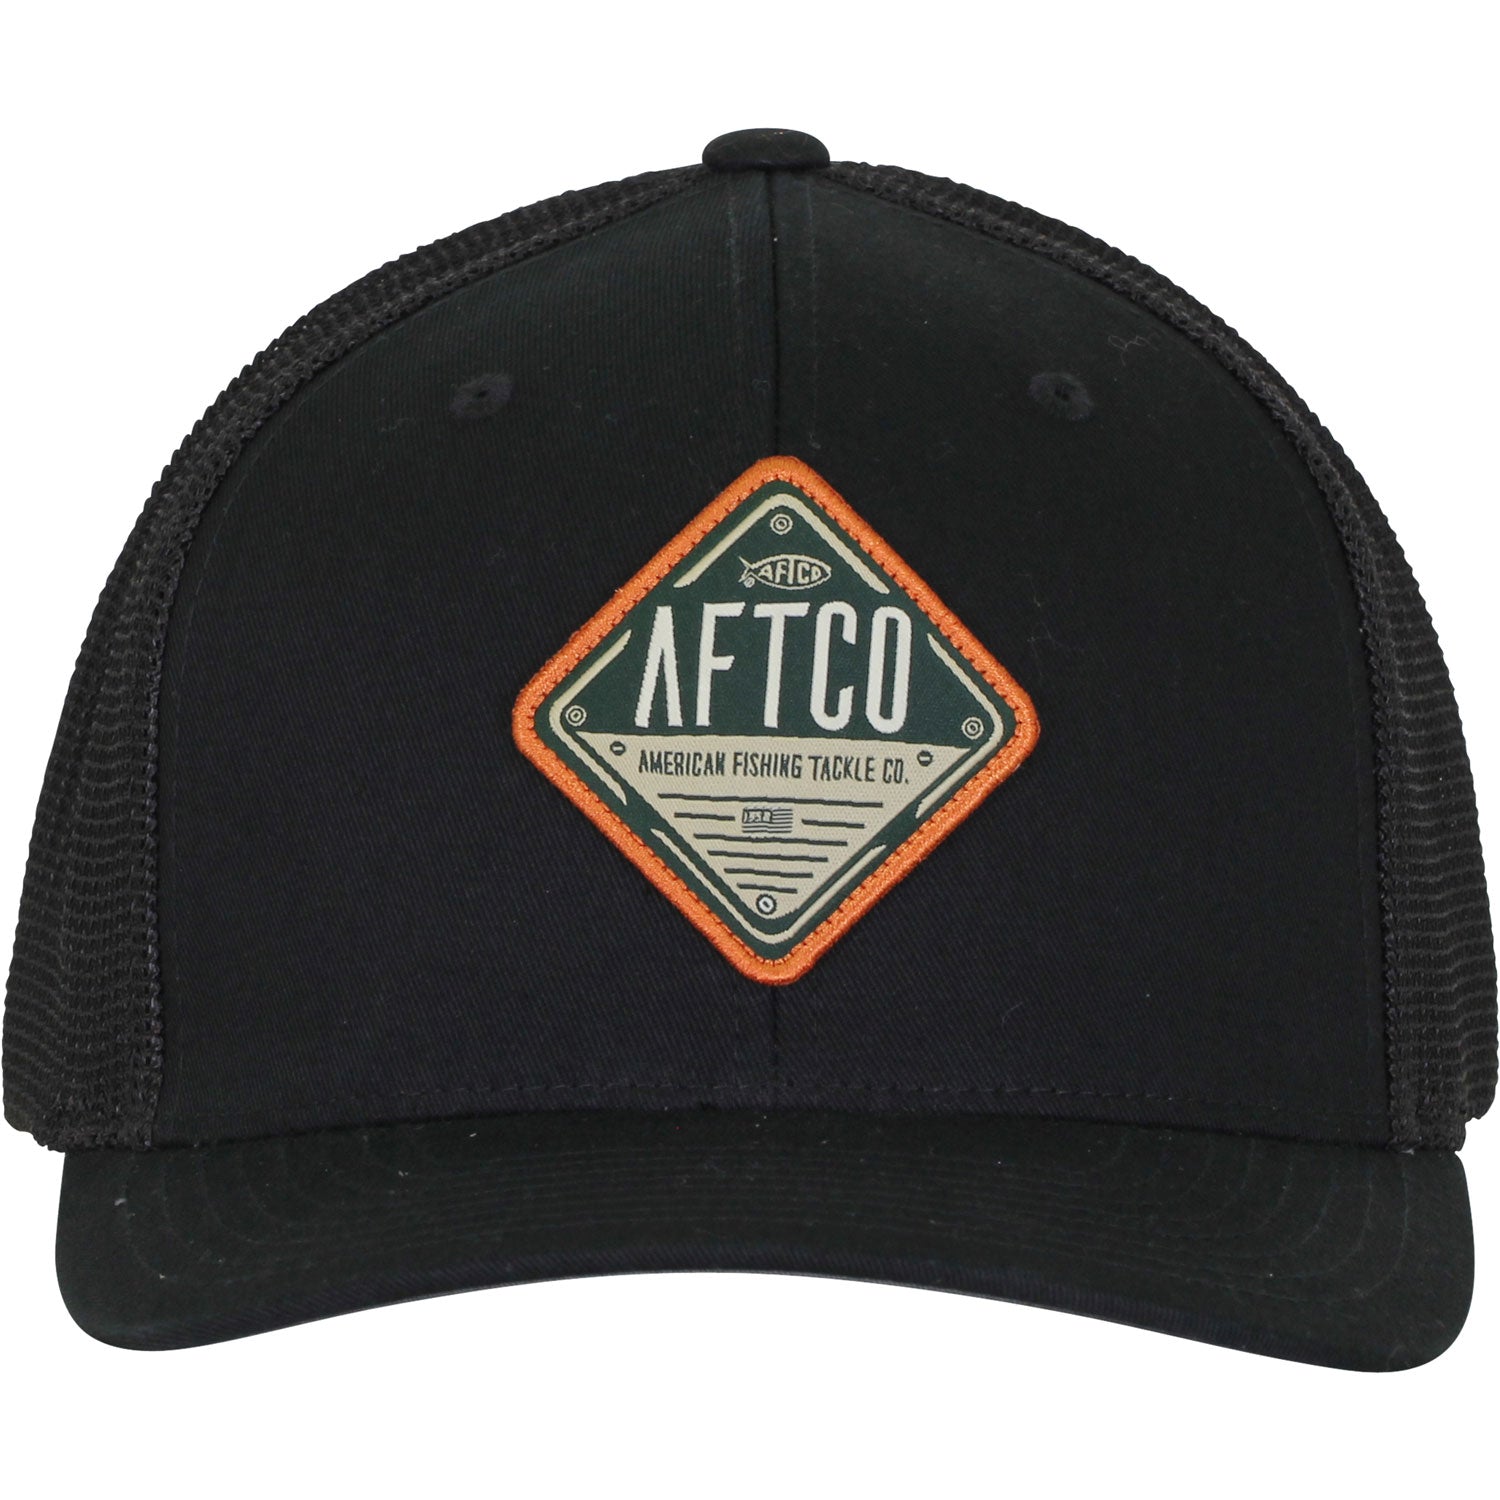 Hats & Visors - All Styles - Free Shipping